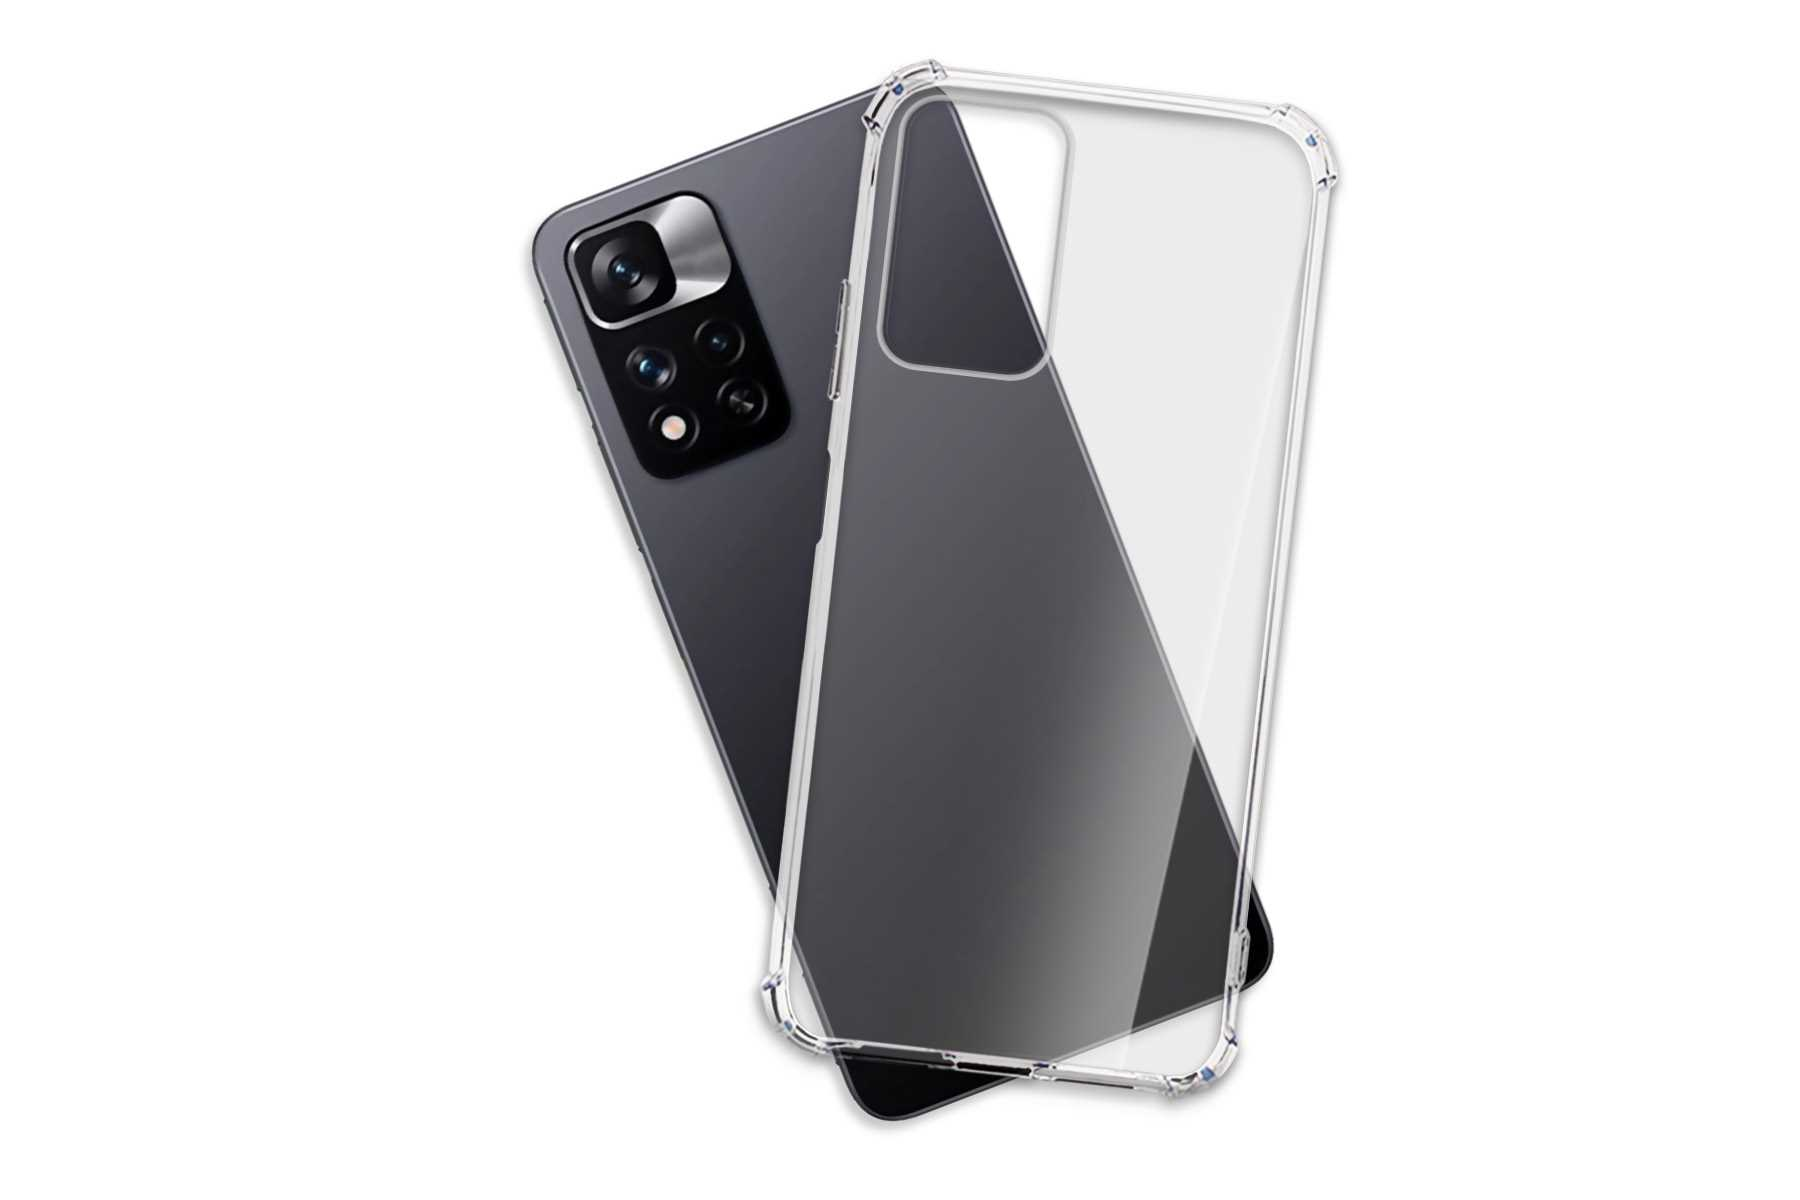 MTB MORE ENERGY Clear Transparent Note Pro 11 Armor Case, 5G, Redmi Plus Xiaomi, Backcover, Pro+, Note11